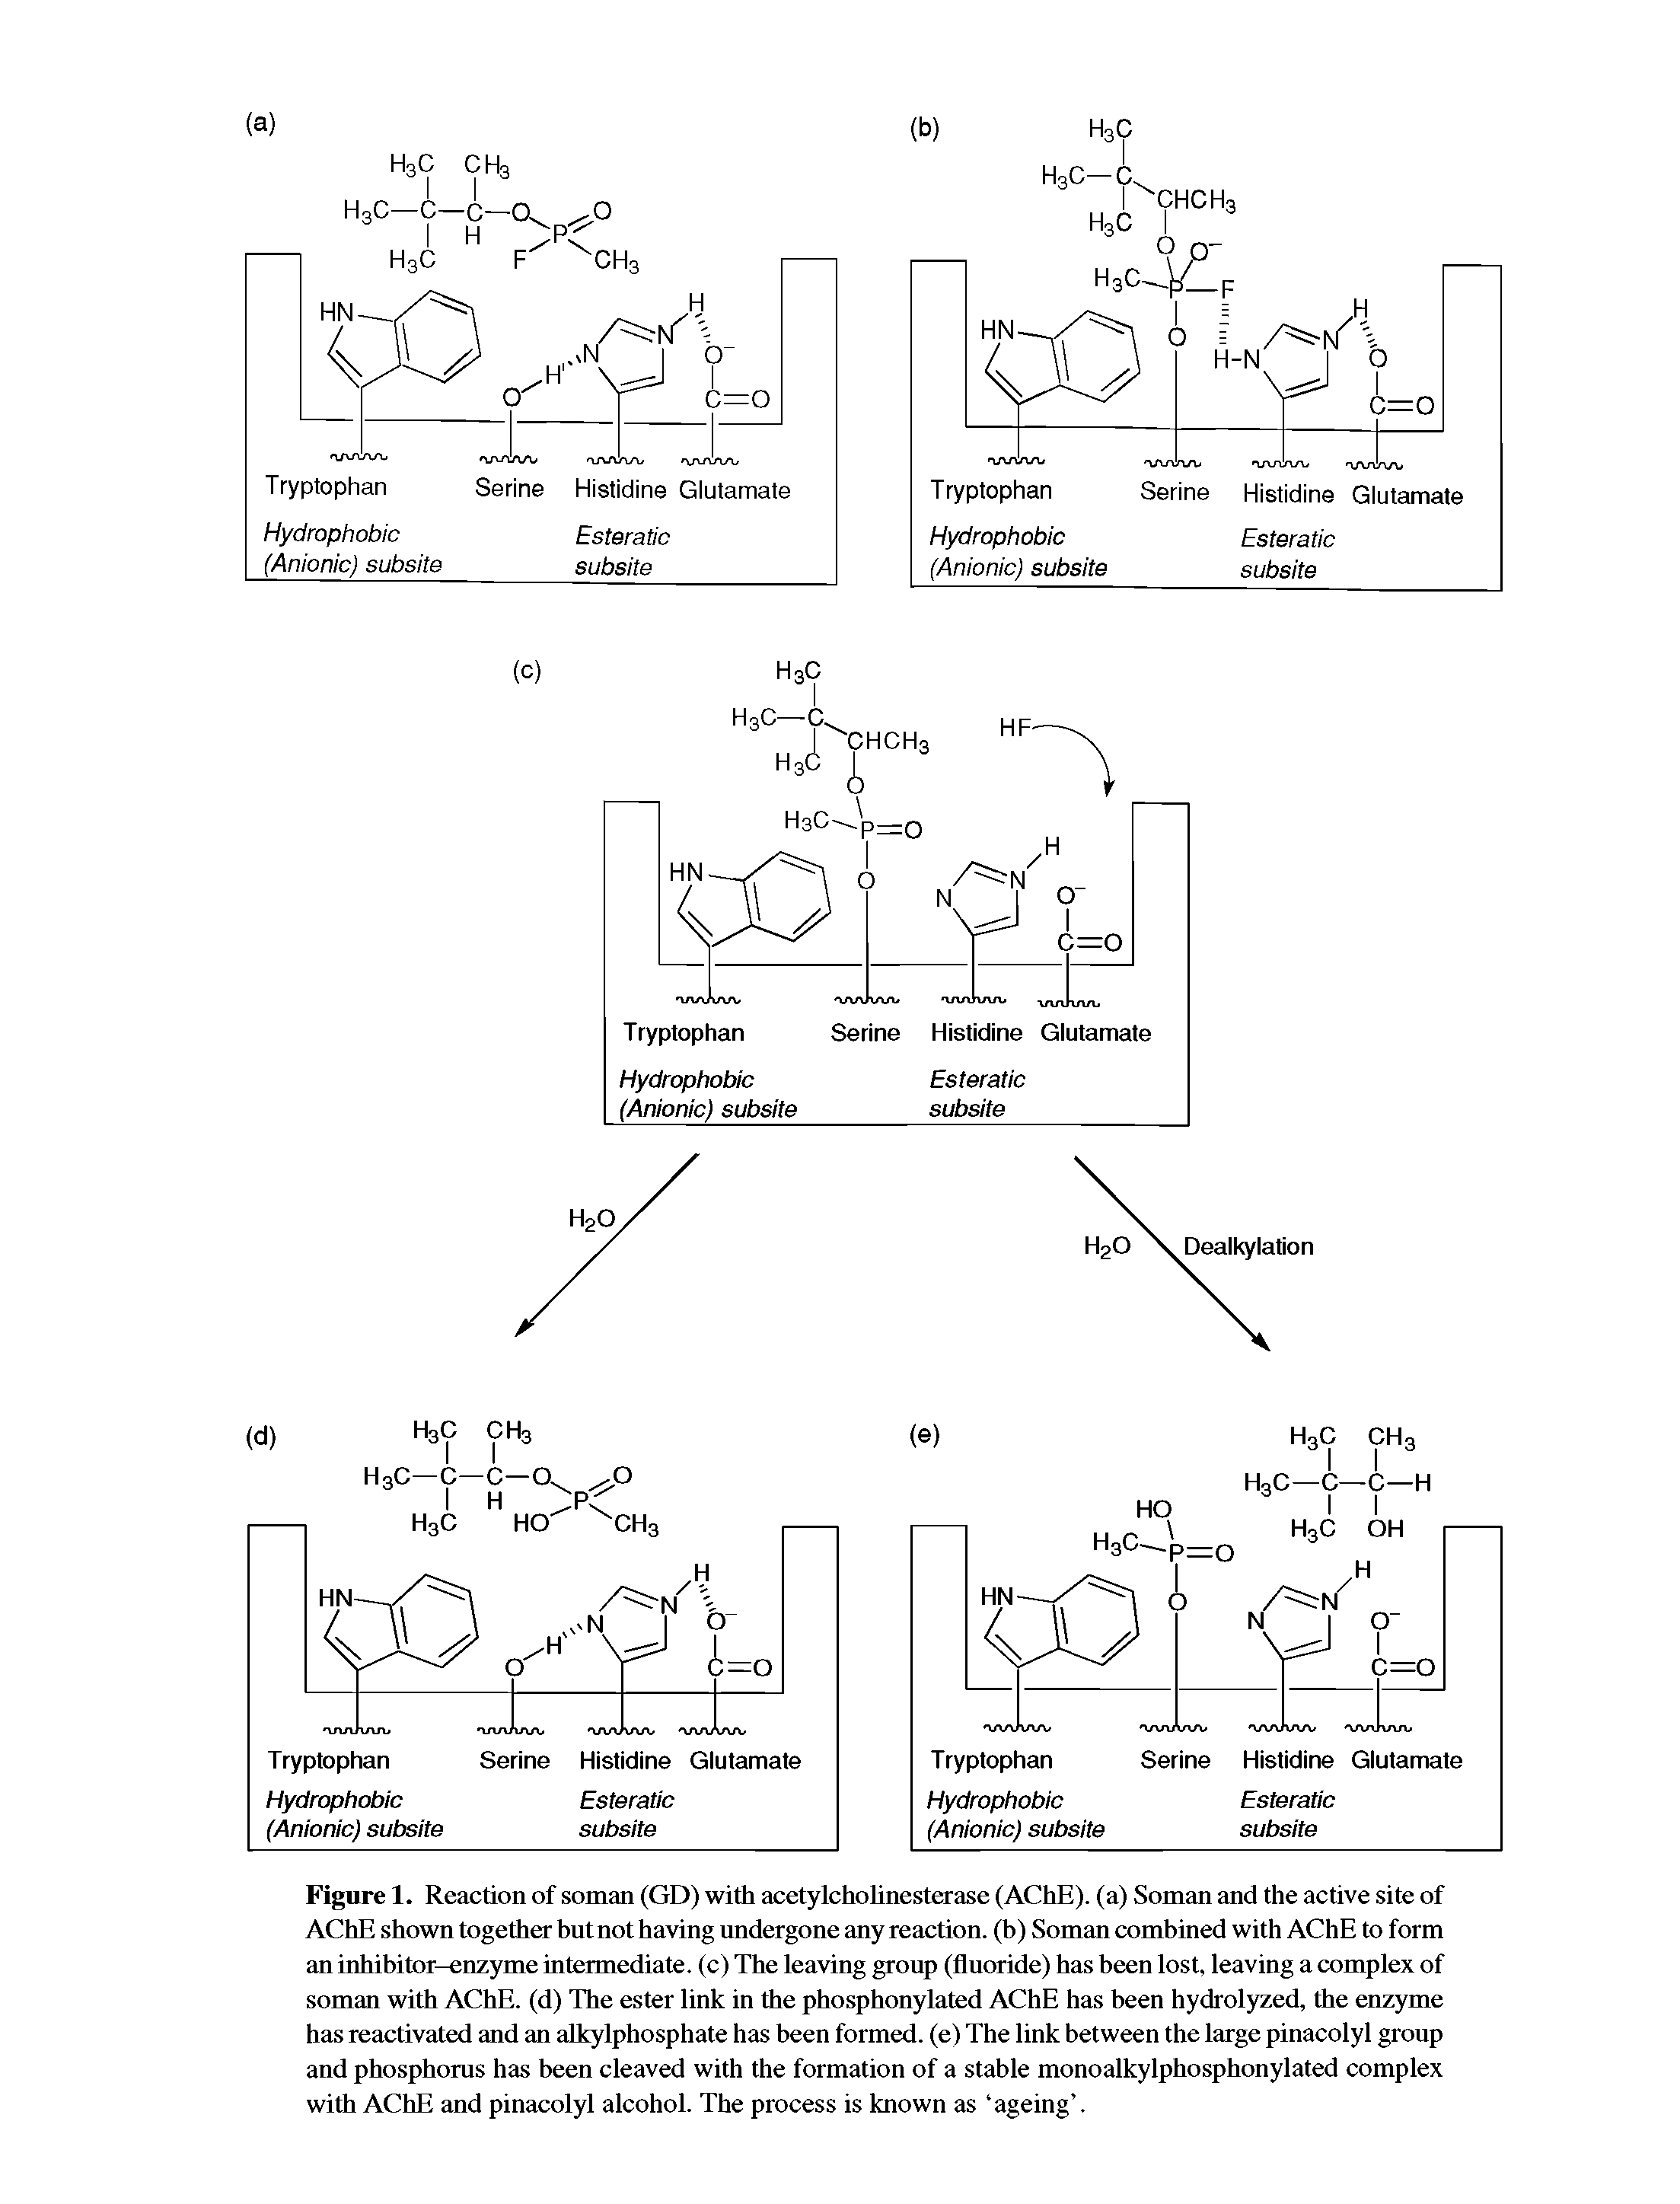 Figure 1. Reaction of soman (GD) with acetylcholinesterase (AChE). (a) Soman and the active site of AChE shown together but not having undergone any reaction, (b) Soman combined with AChE to form an inhibitor-enzyme intermediate, (c) The leaving group (fluoride) has been lost, leaving a complex of soman with AChE. (d) The ester link in the phosphonylated AChE has been hydrolyzed, the enzyme has reactivated and an alkylphosphate has been formed, (e) The link between the large pinacolyl group and phosphorus has been cleaved with the formation of a stable monoalkylphosphonylated complex with AChE and pinacolyl alcohol. The process is known as ageing .